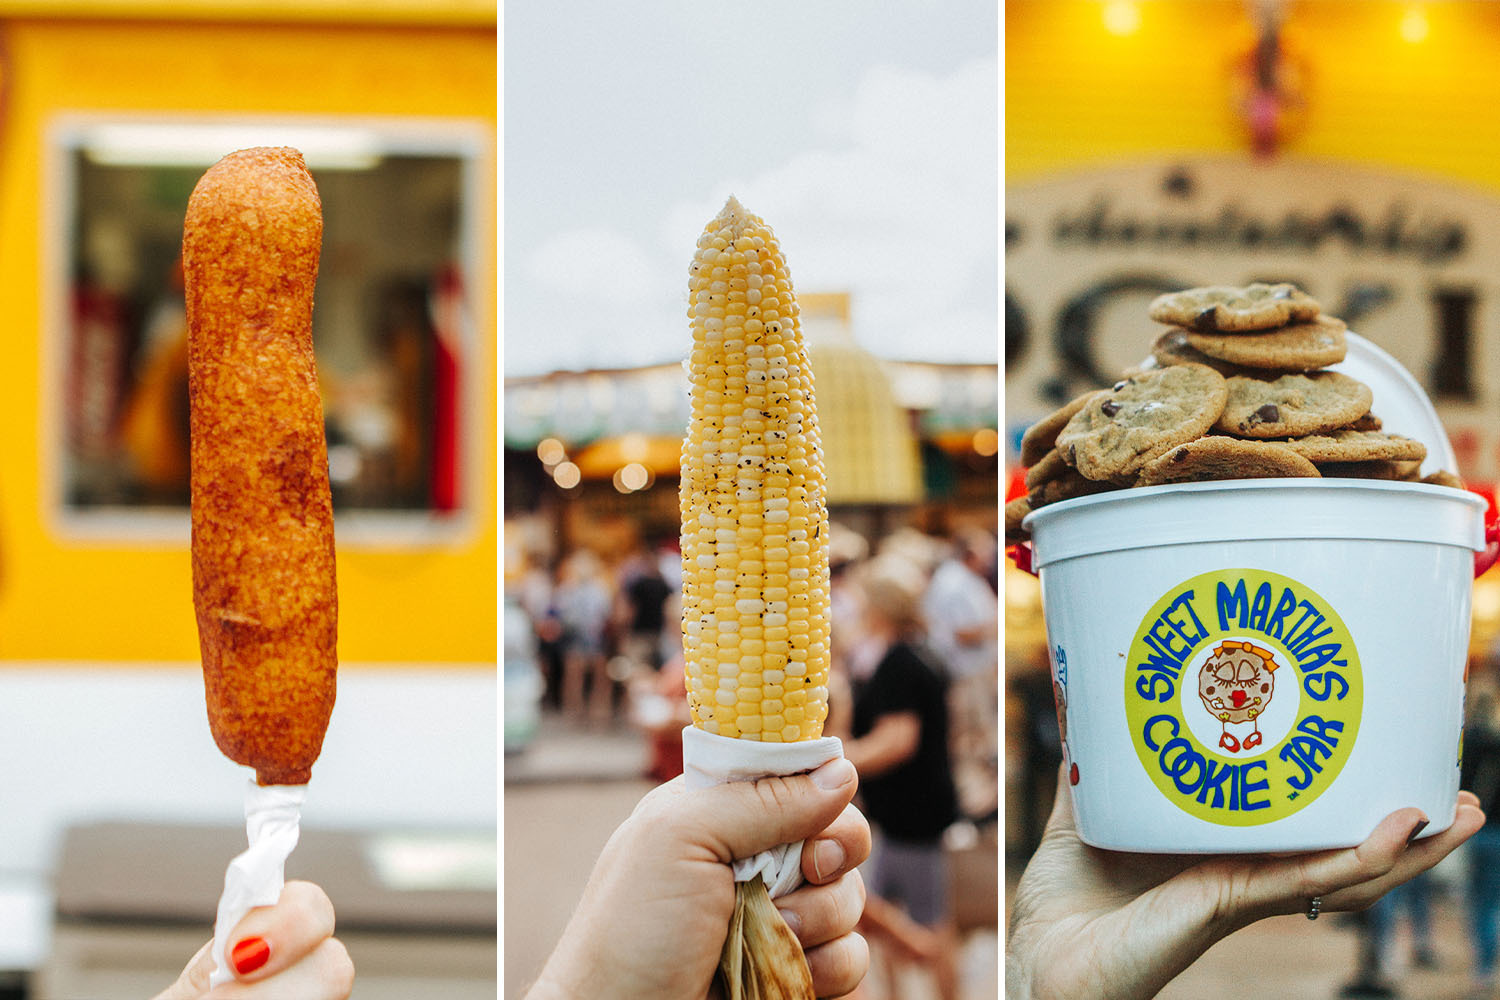 A corn dog, roasted corn on the cob and Sweet Martha's cookies from the Minnesota State Fair